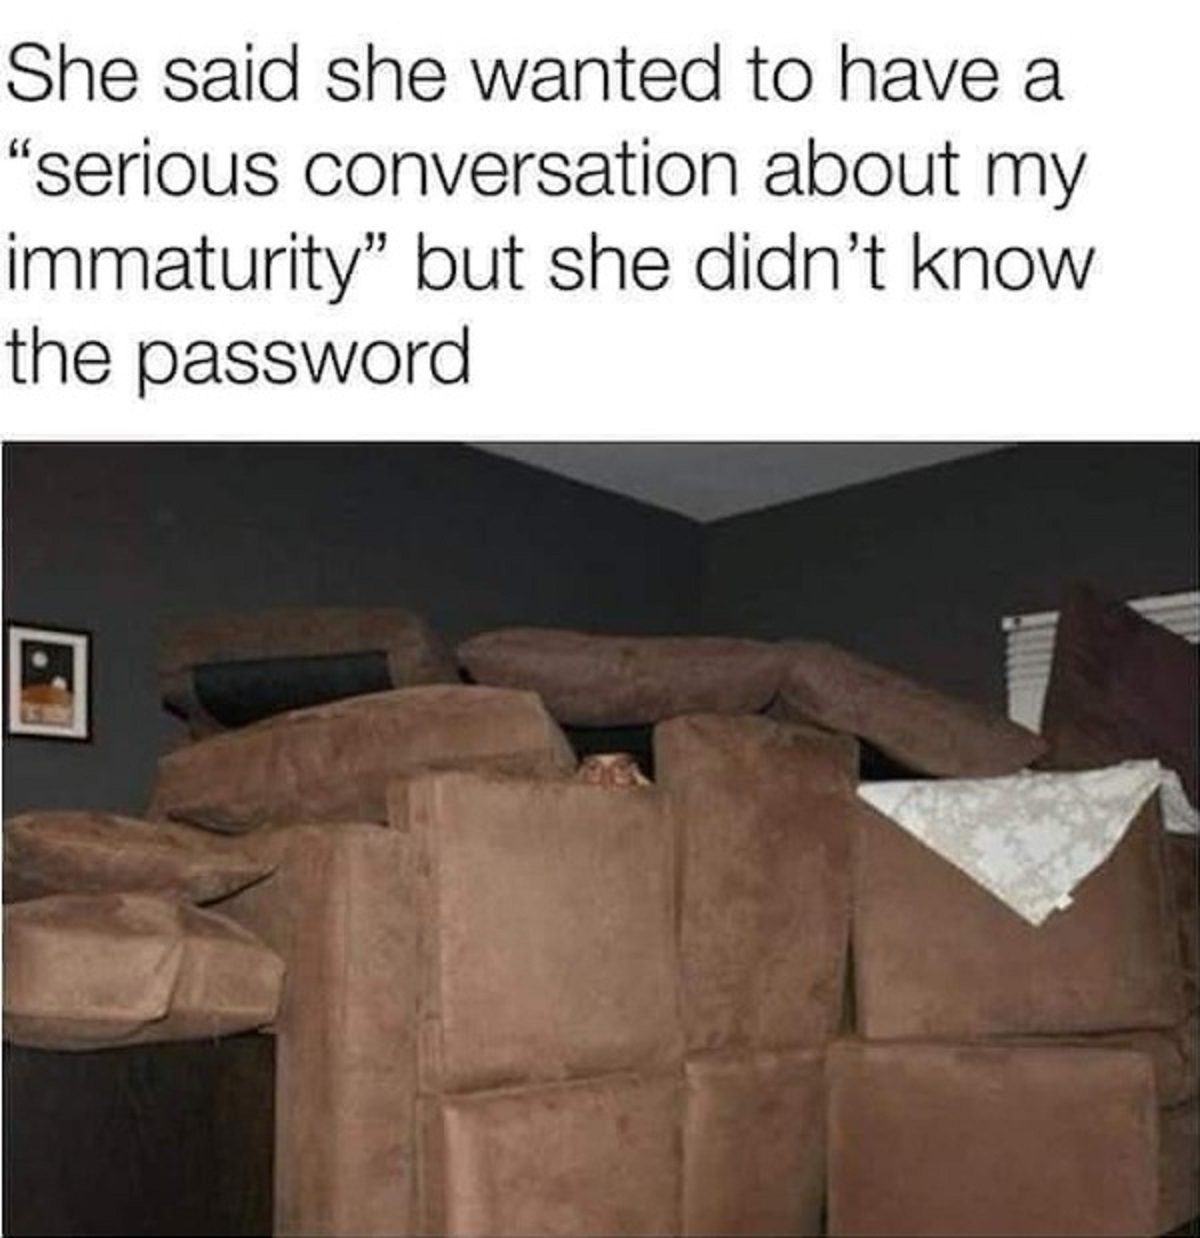 forts meme - She said she wanted to have a "serious conversation about my immaturity" but she didn't know the password